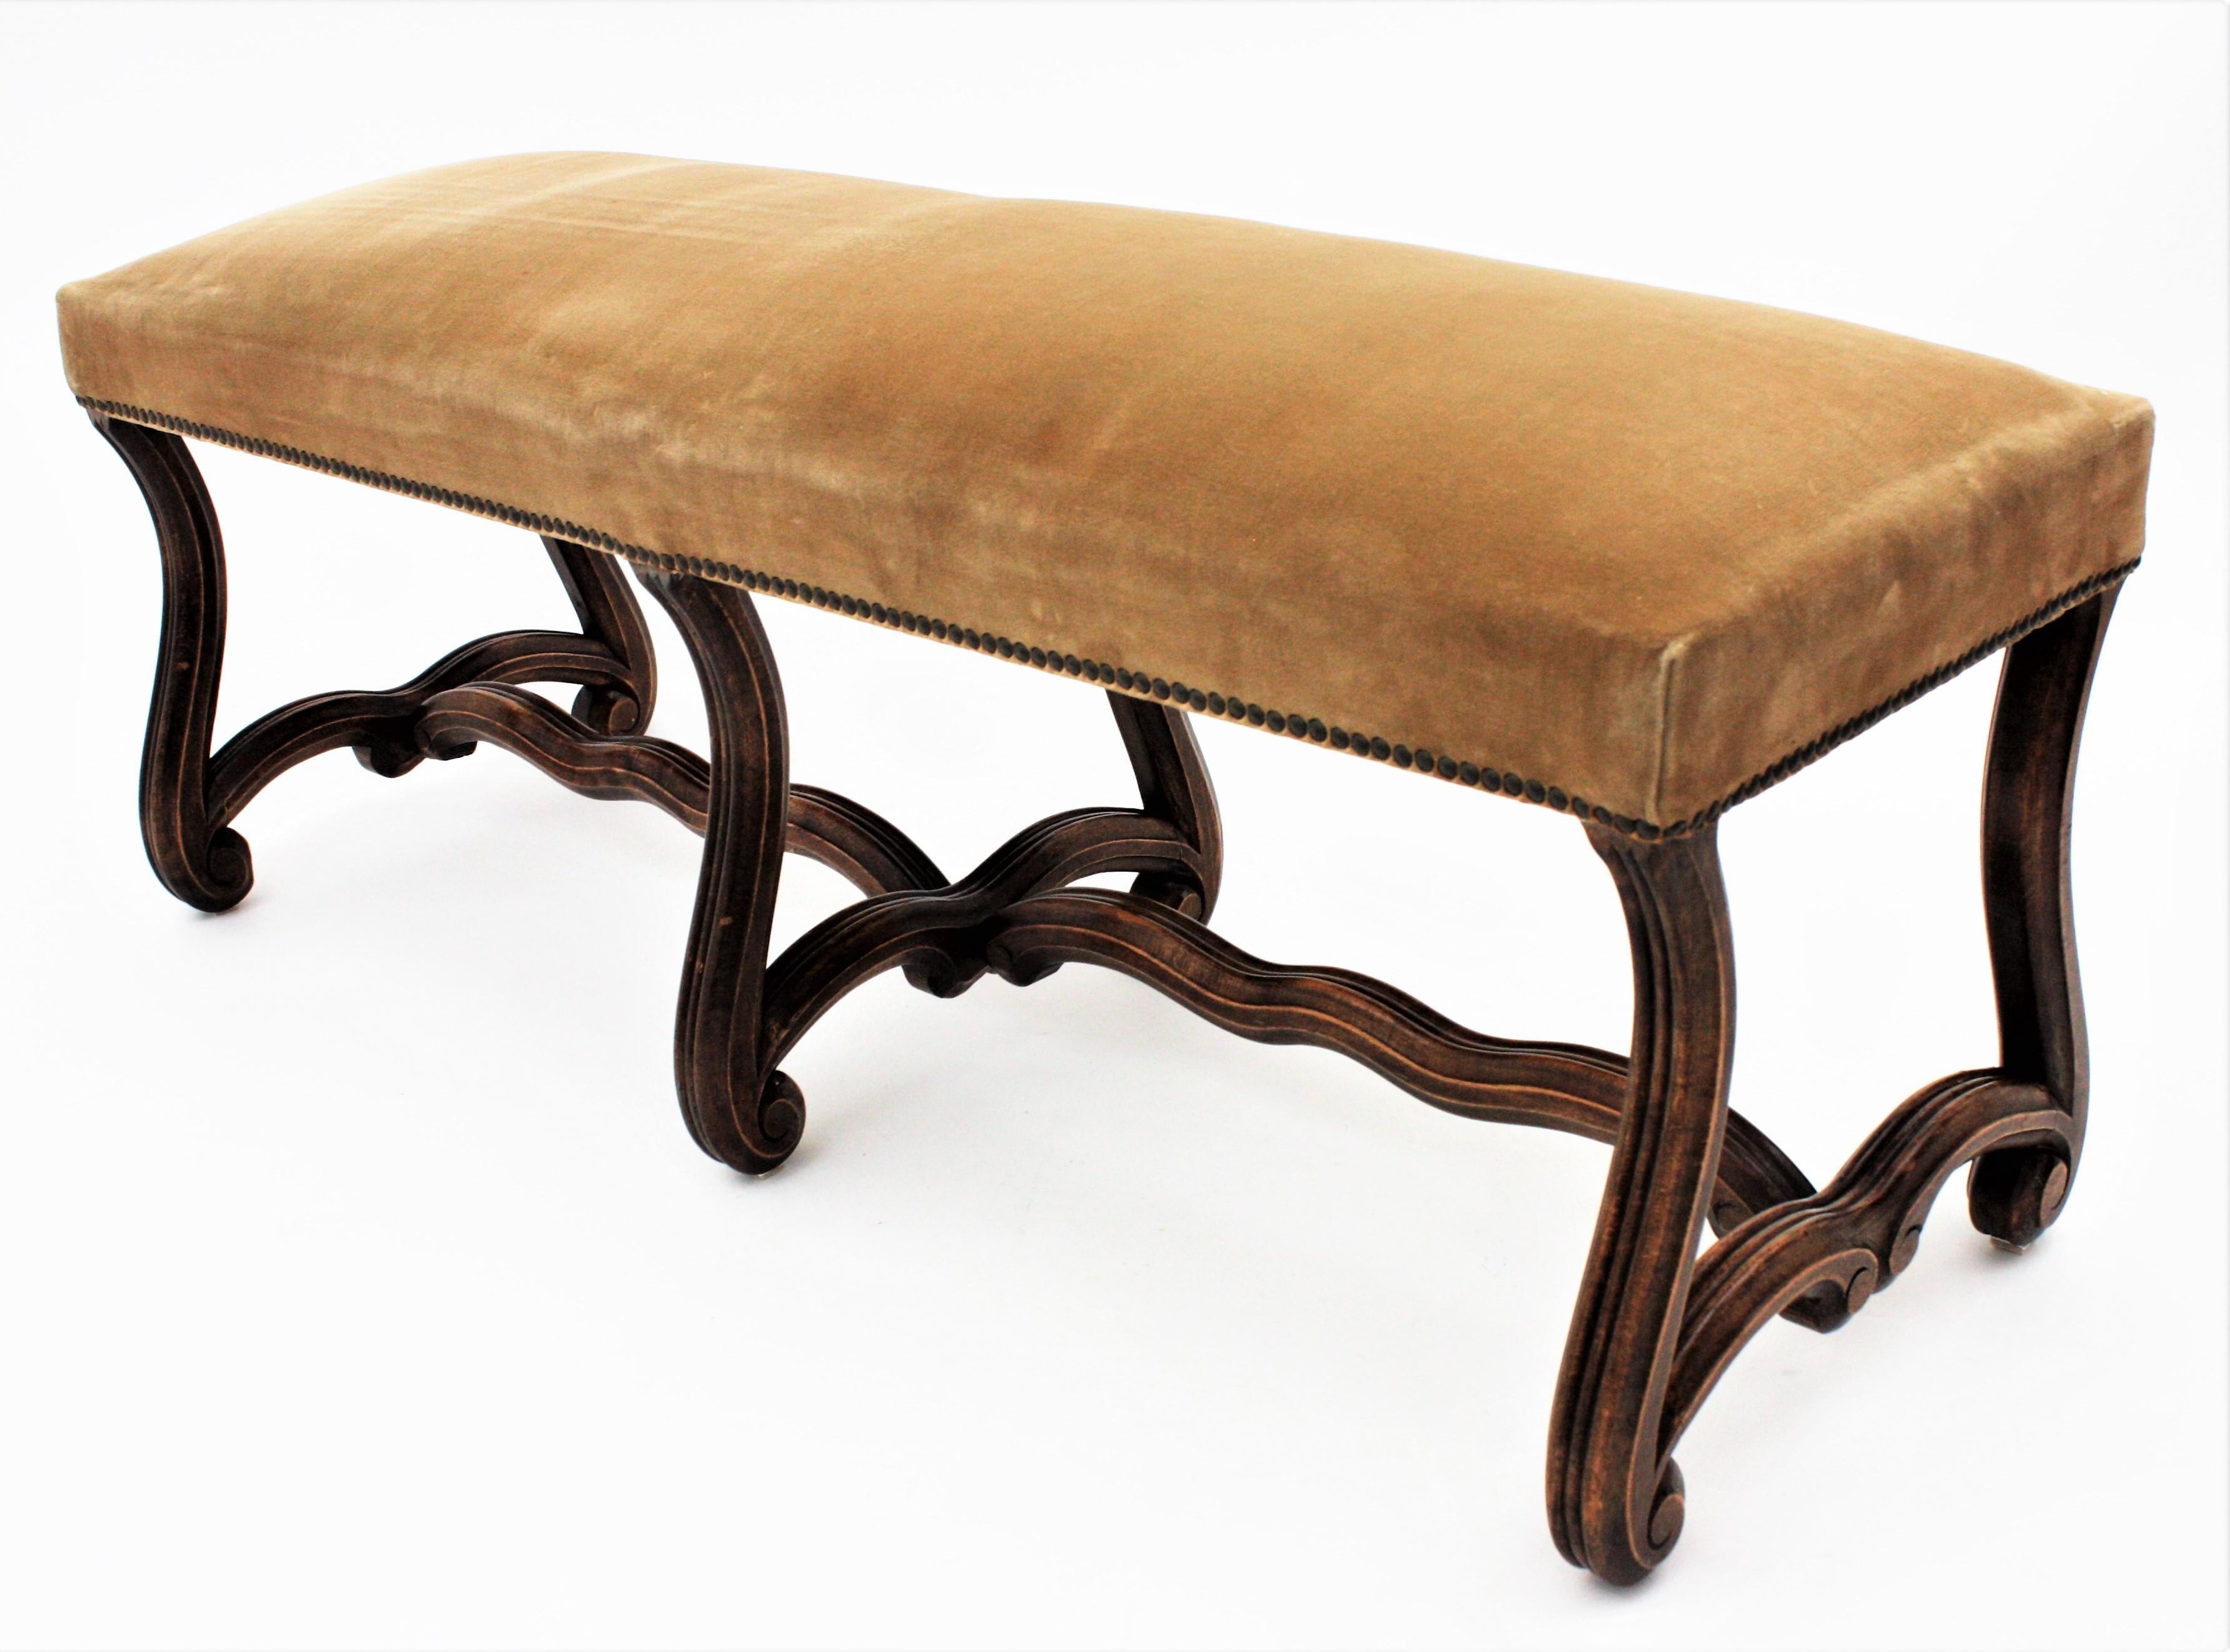 A large 19th century backless Louis XIV style bench or stool raised on six Os de Mouton hand carved walnut wood legs with stretcher, France, circa 1930.
This stylish banquette has scrolled accents on the legs.
This bench is in exquisite fully